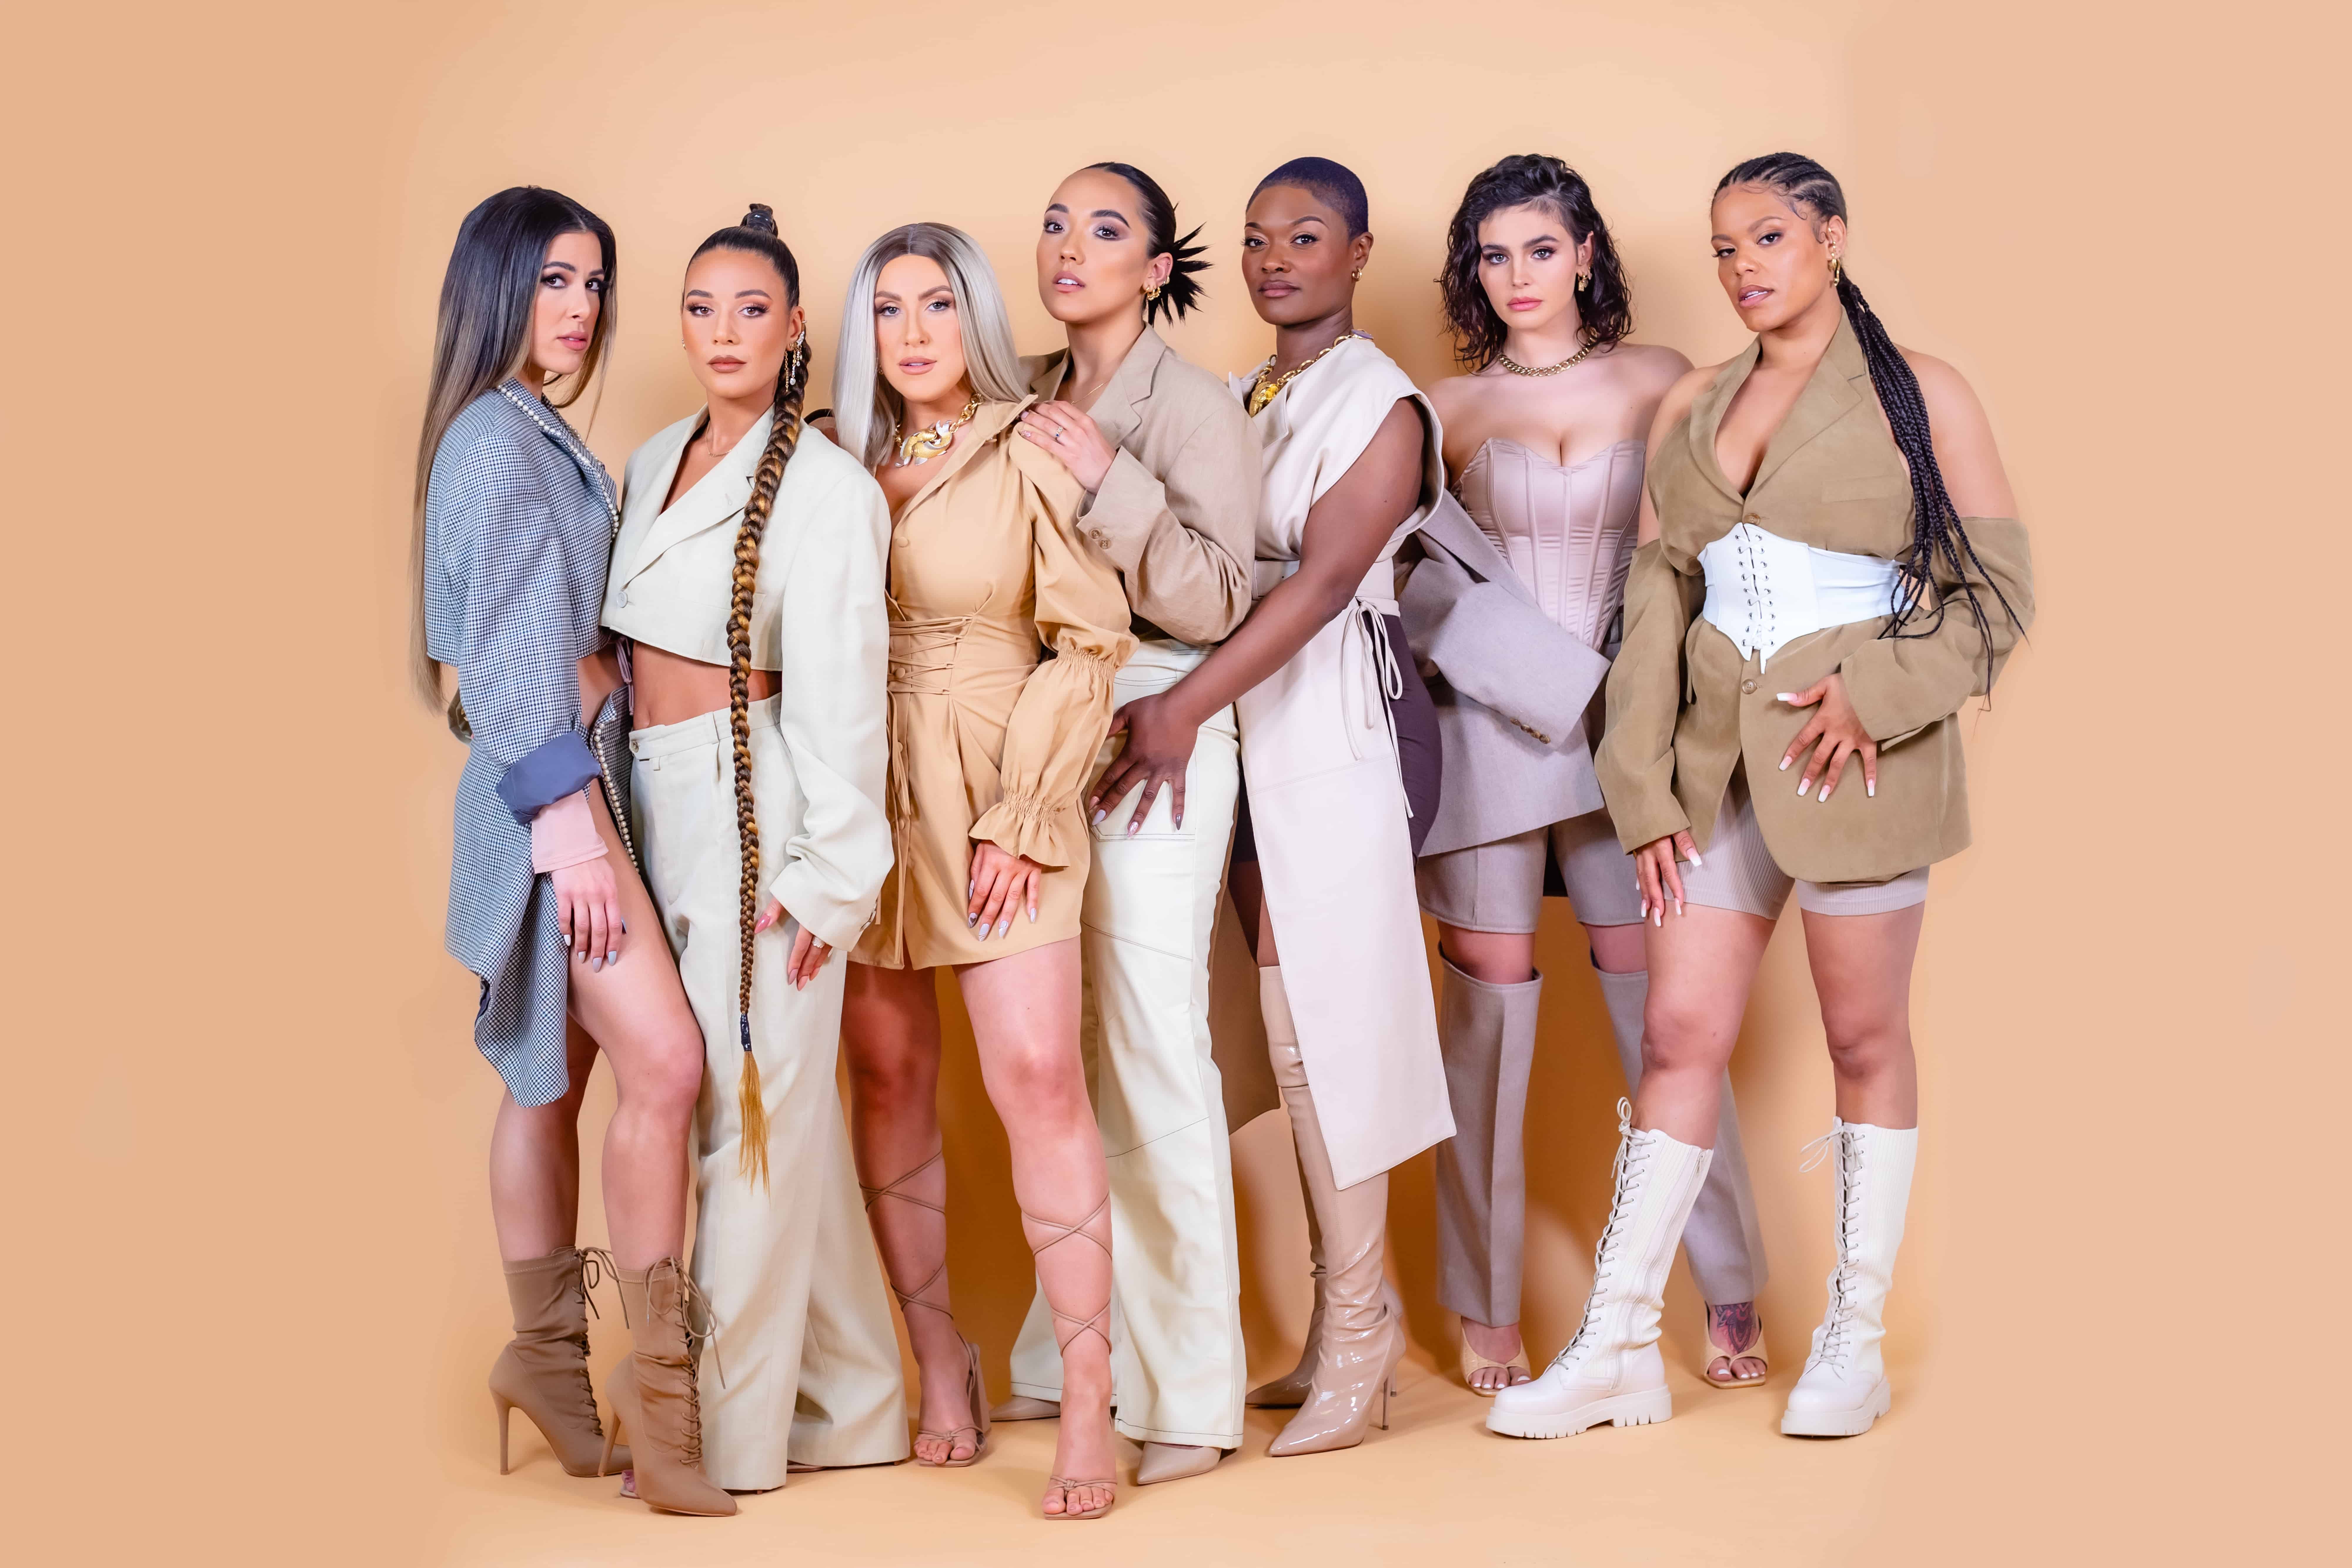 SVN are, from left to right: Aimie Atkinson, Maiya Quansah-Breed, Natalie May Paris, Grace Mouat, Alexia McIntosh, Millie O'Connell and Jay'J Richard-Noel. Credit Danny Kaan